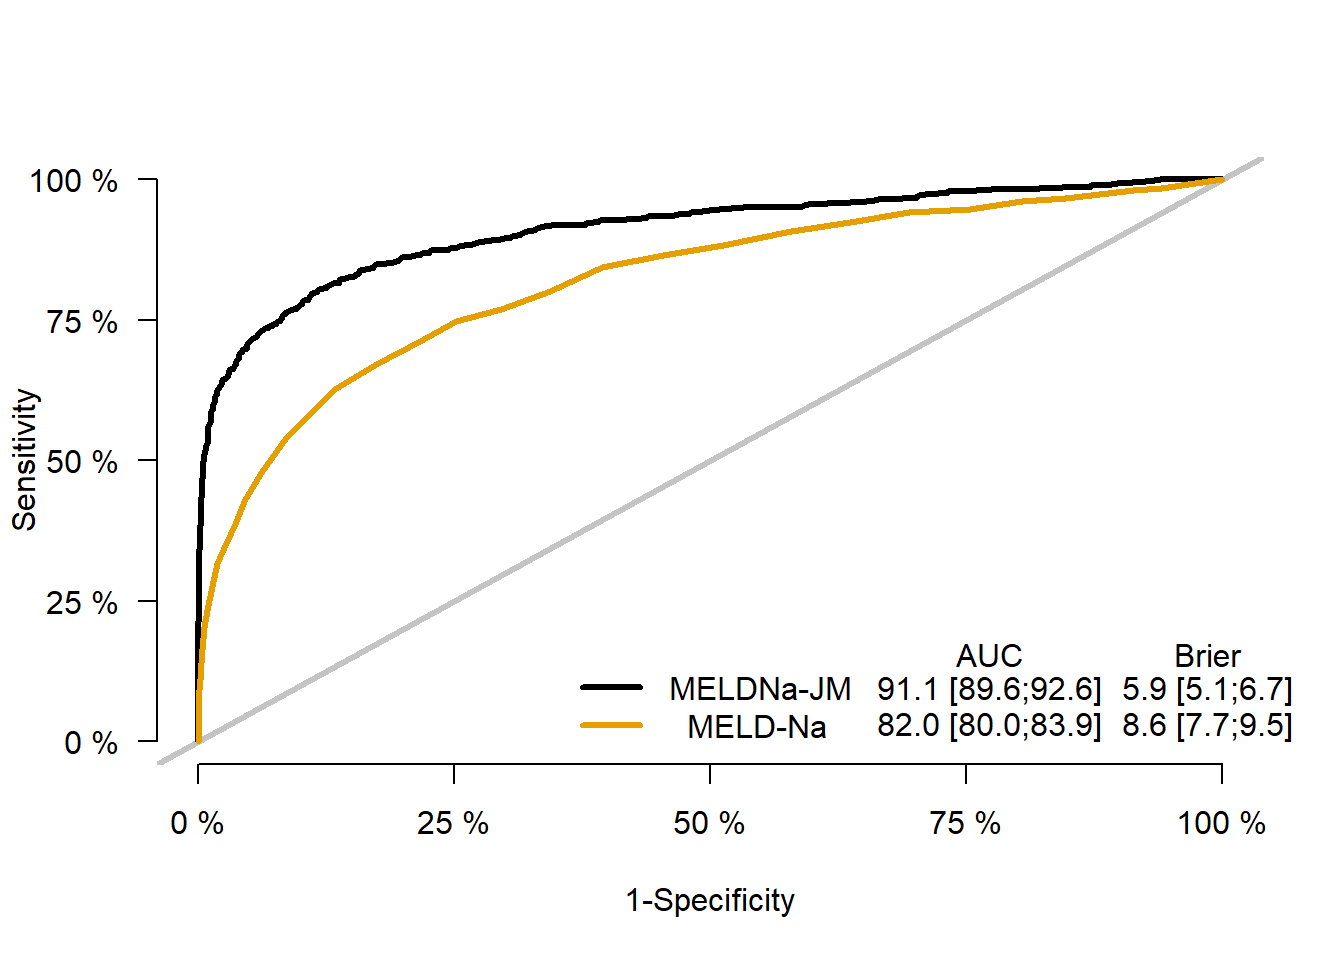 Performance measures for the MELDNa-JM and MELD-Na.